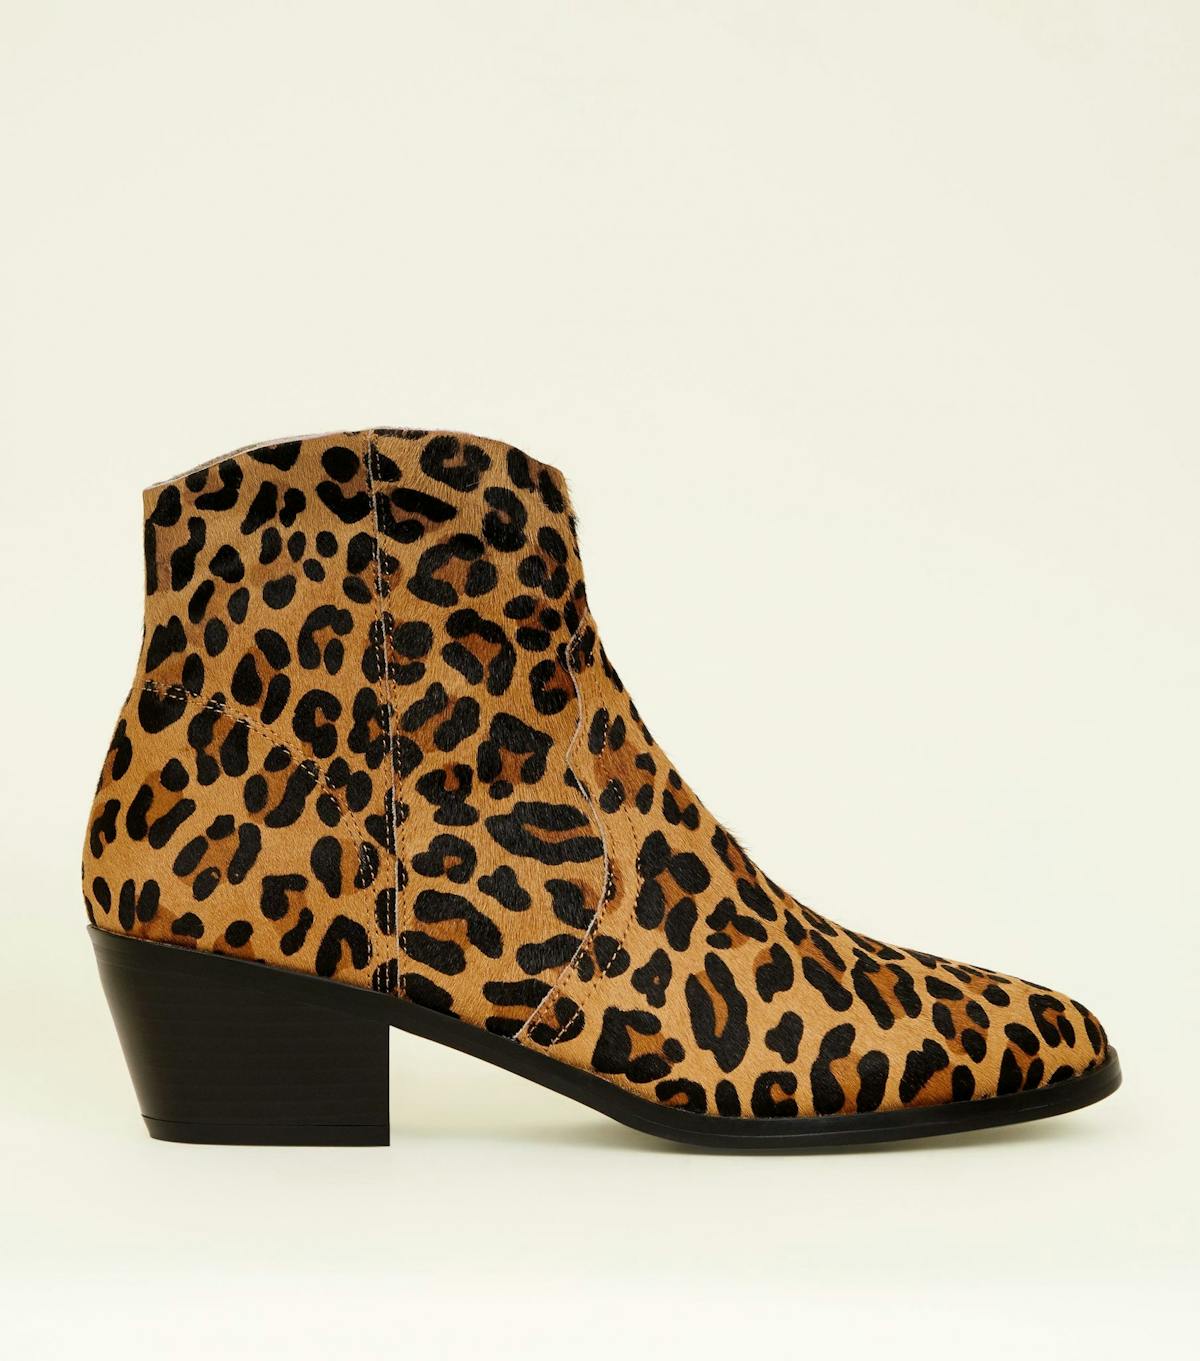 11 animal print boots that are perfect for any weather